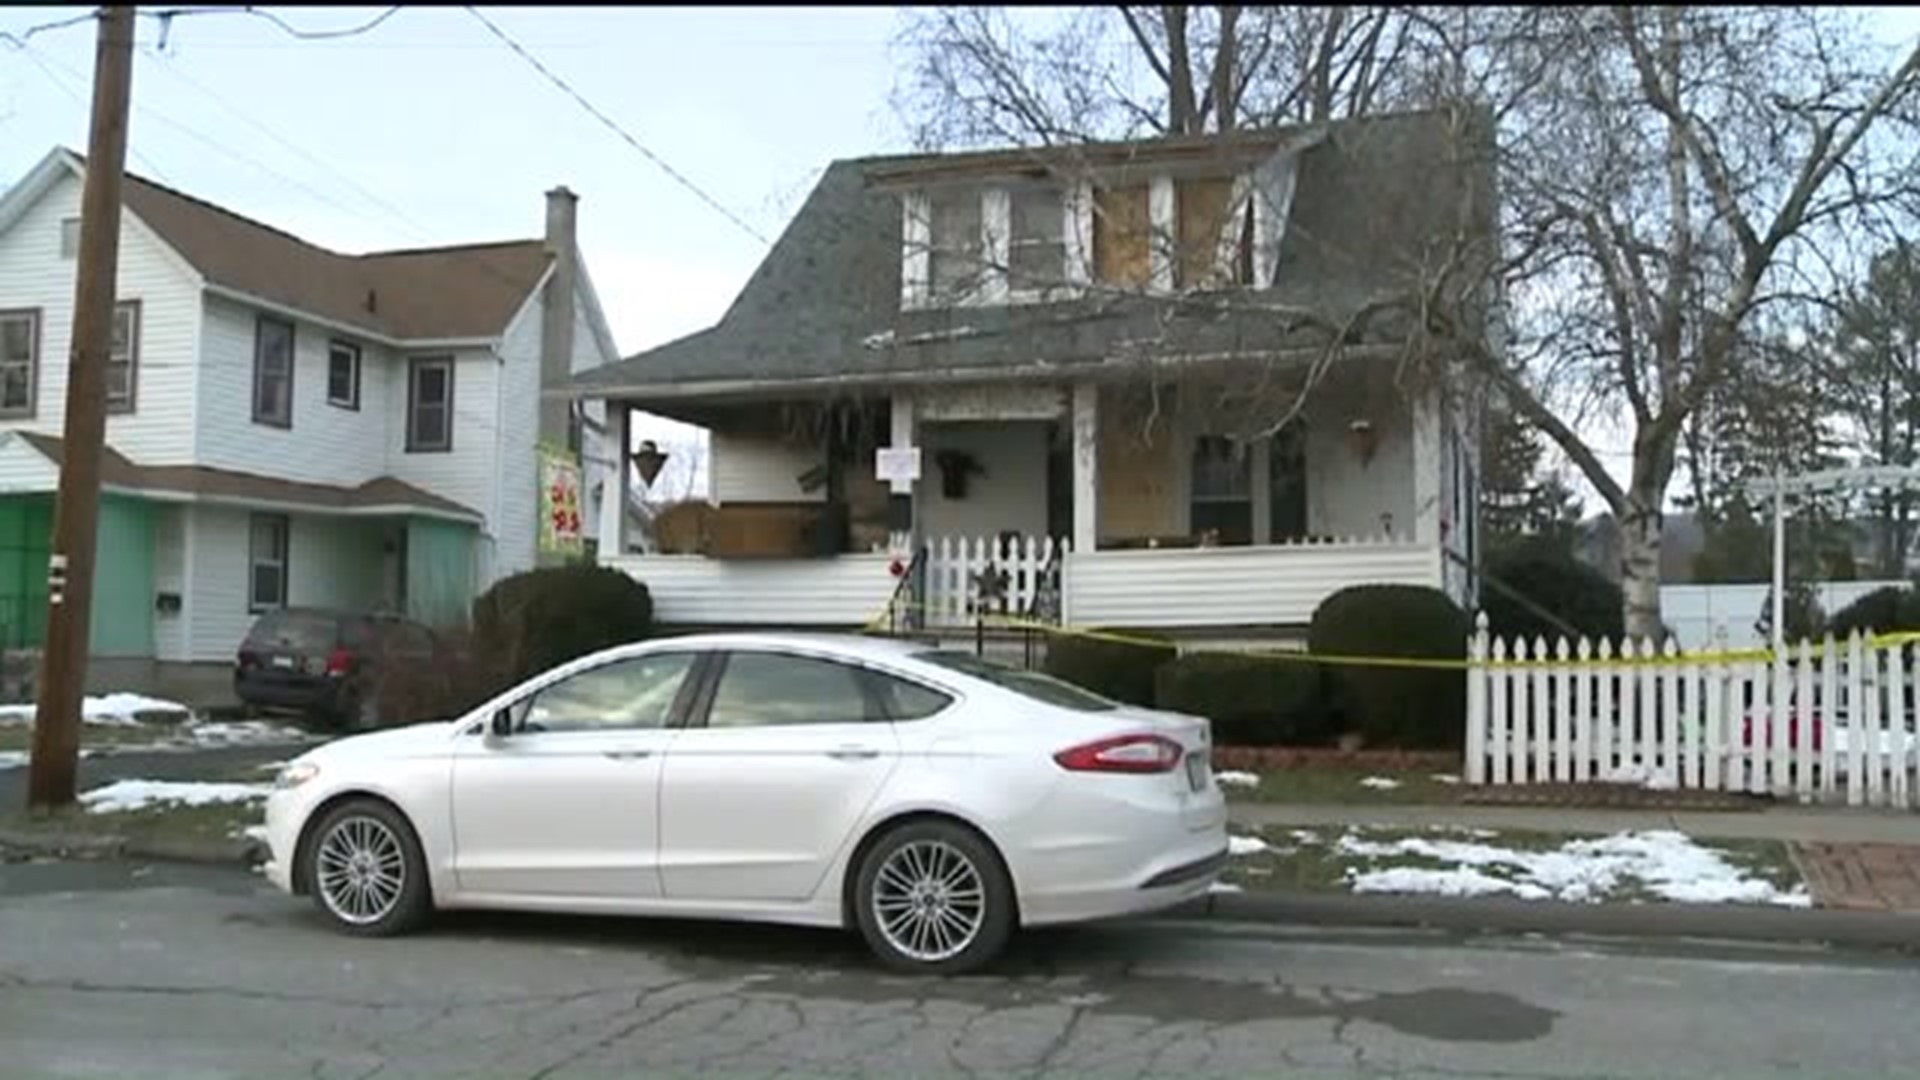 Home in Williamsport Damaged by Flames